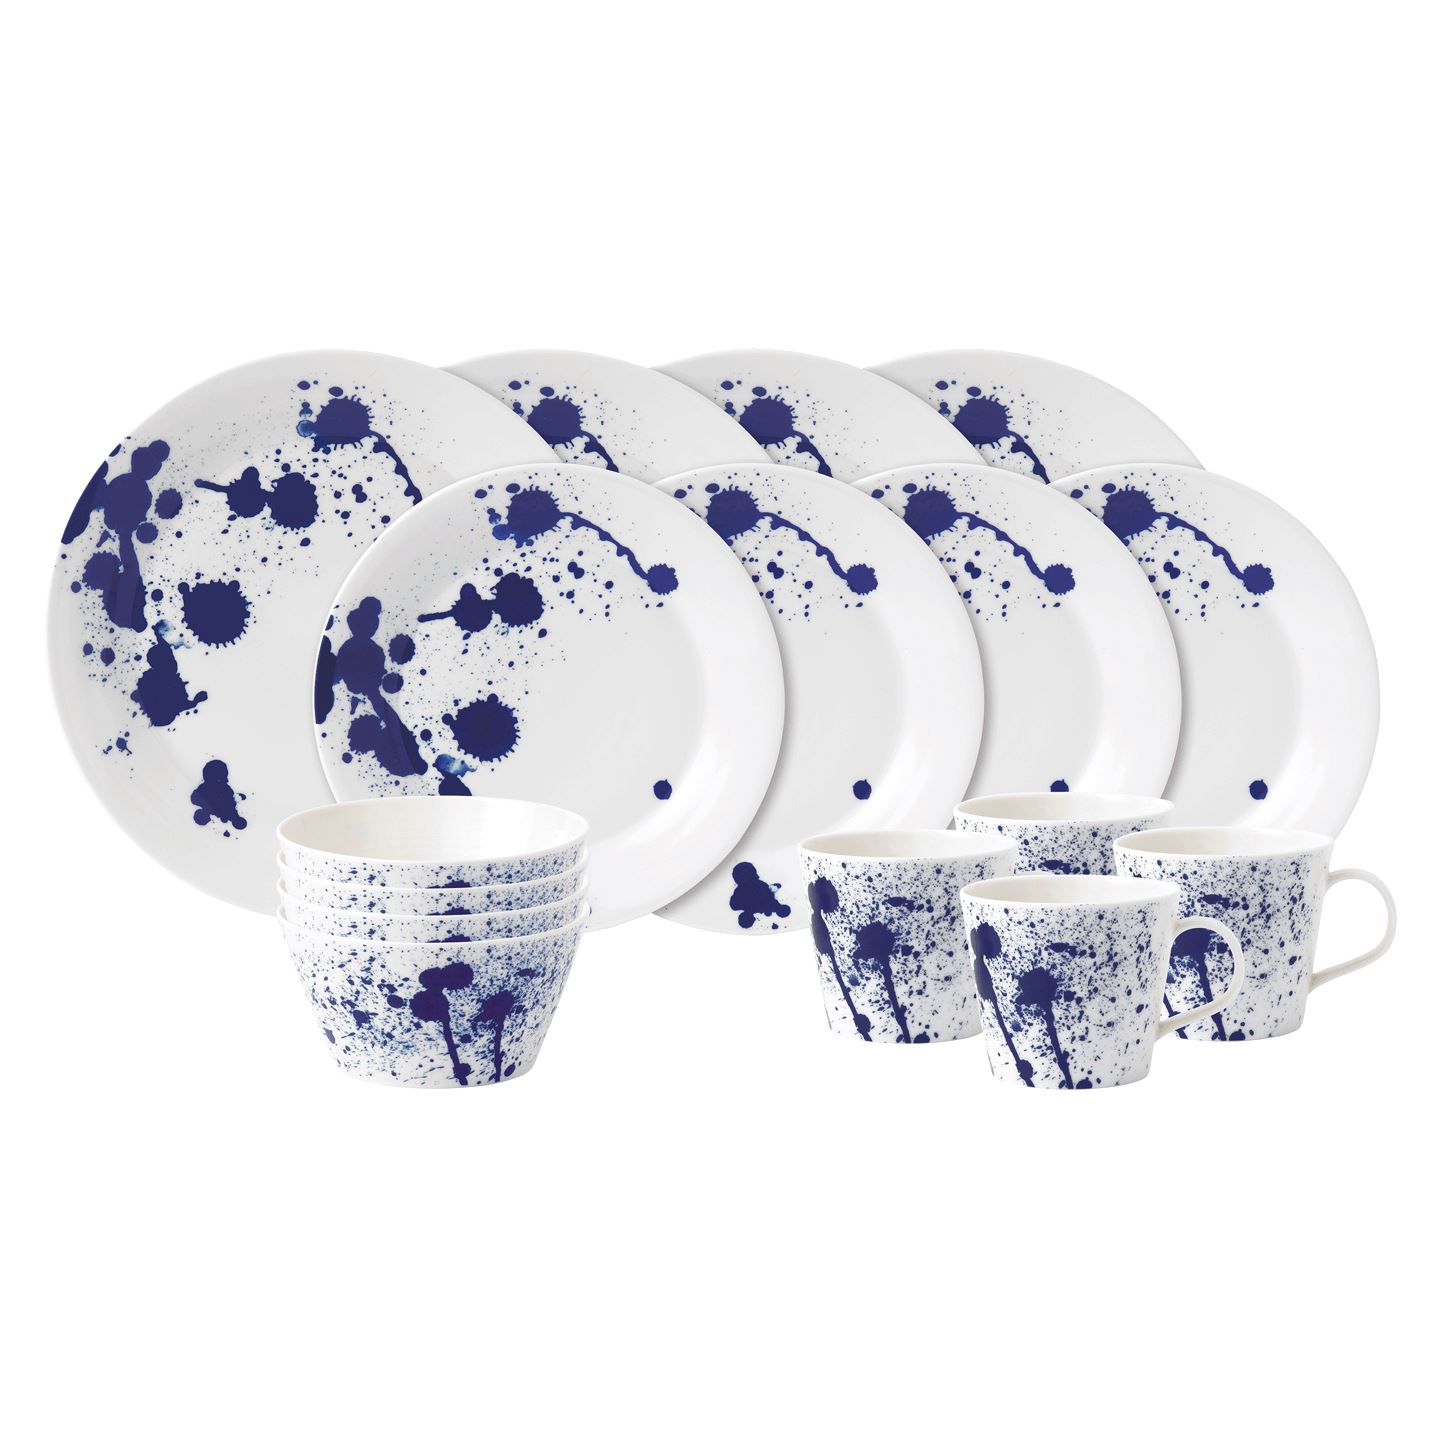 Dessert Plates and Dinner Plates Blue/White Dinner Service for 4 with a Blue Rim consisting of Coffee Cups Bowls S P SALT PEPPER Premium Tableware Set 16 Pieces of Bone China Porcelain 